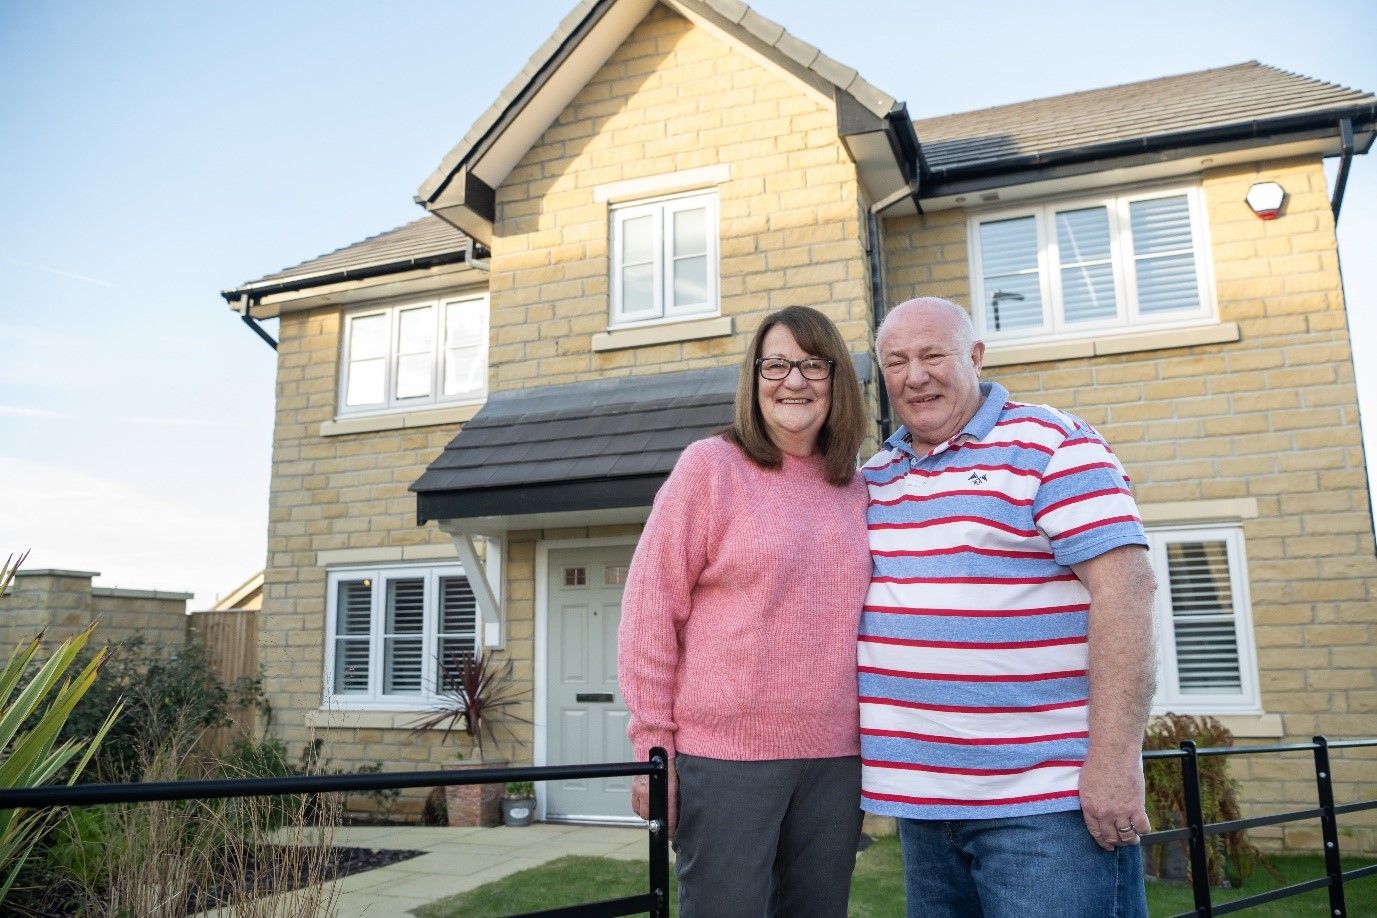 “It’s changed our lives” – couple buy new house at Cavendish Park after 35 years in their old place